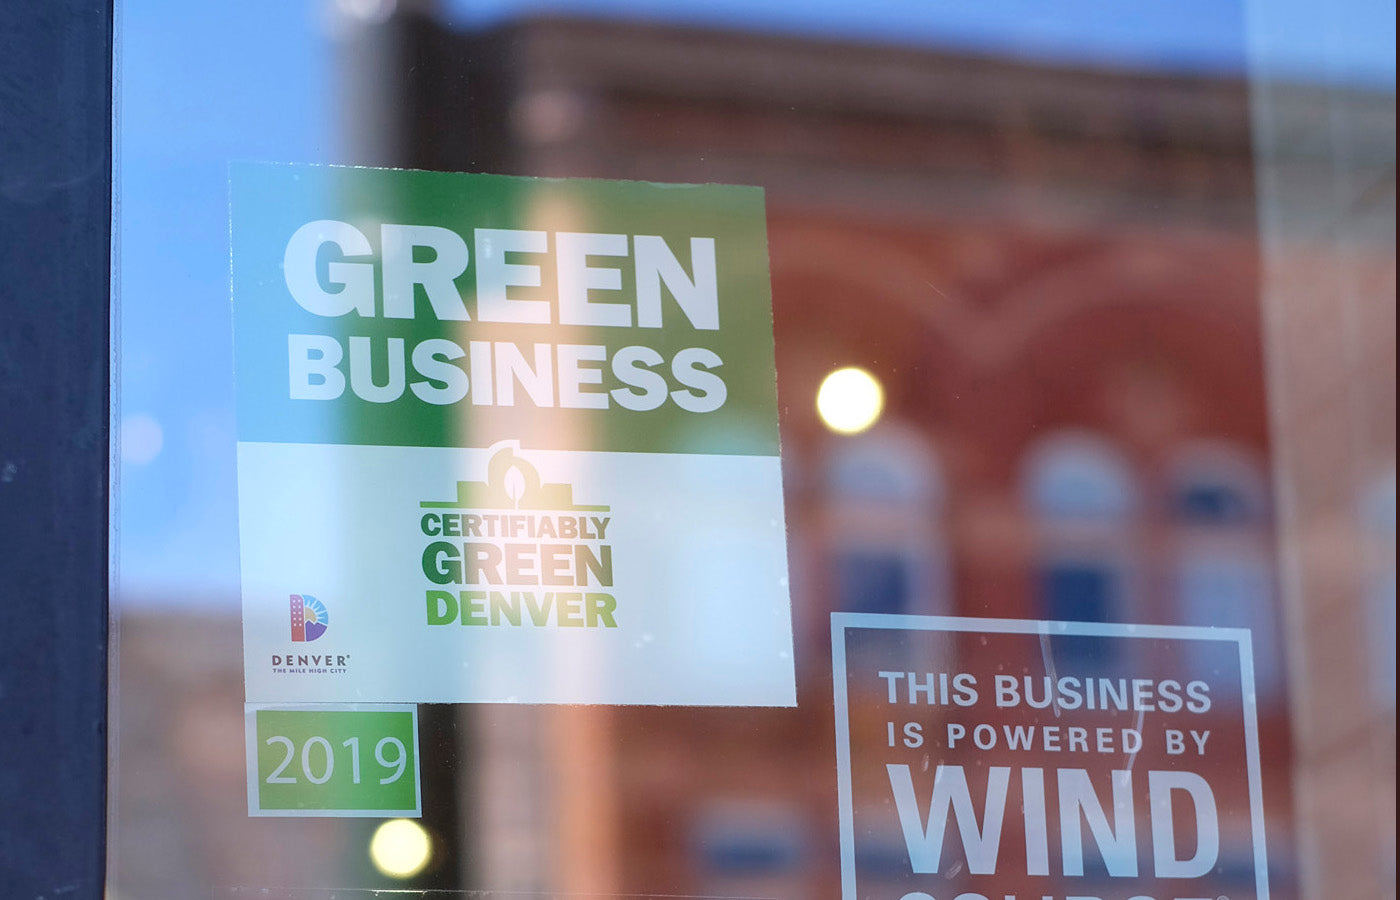 green business decal on store front